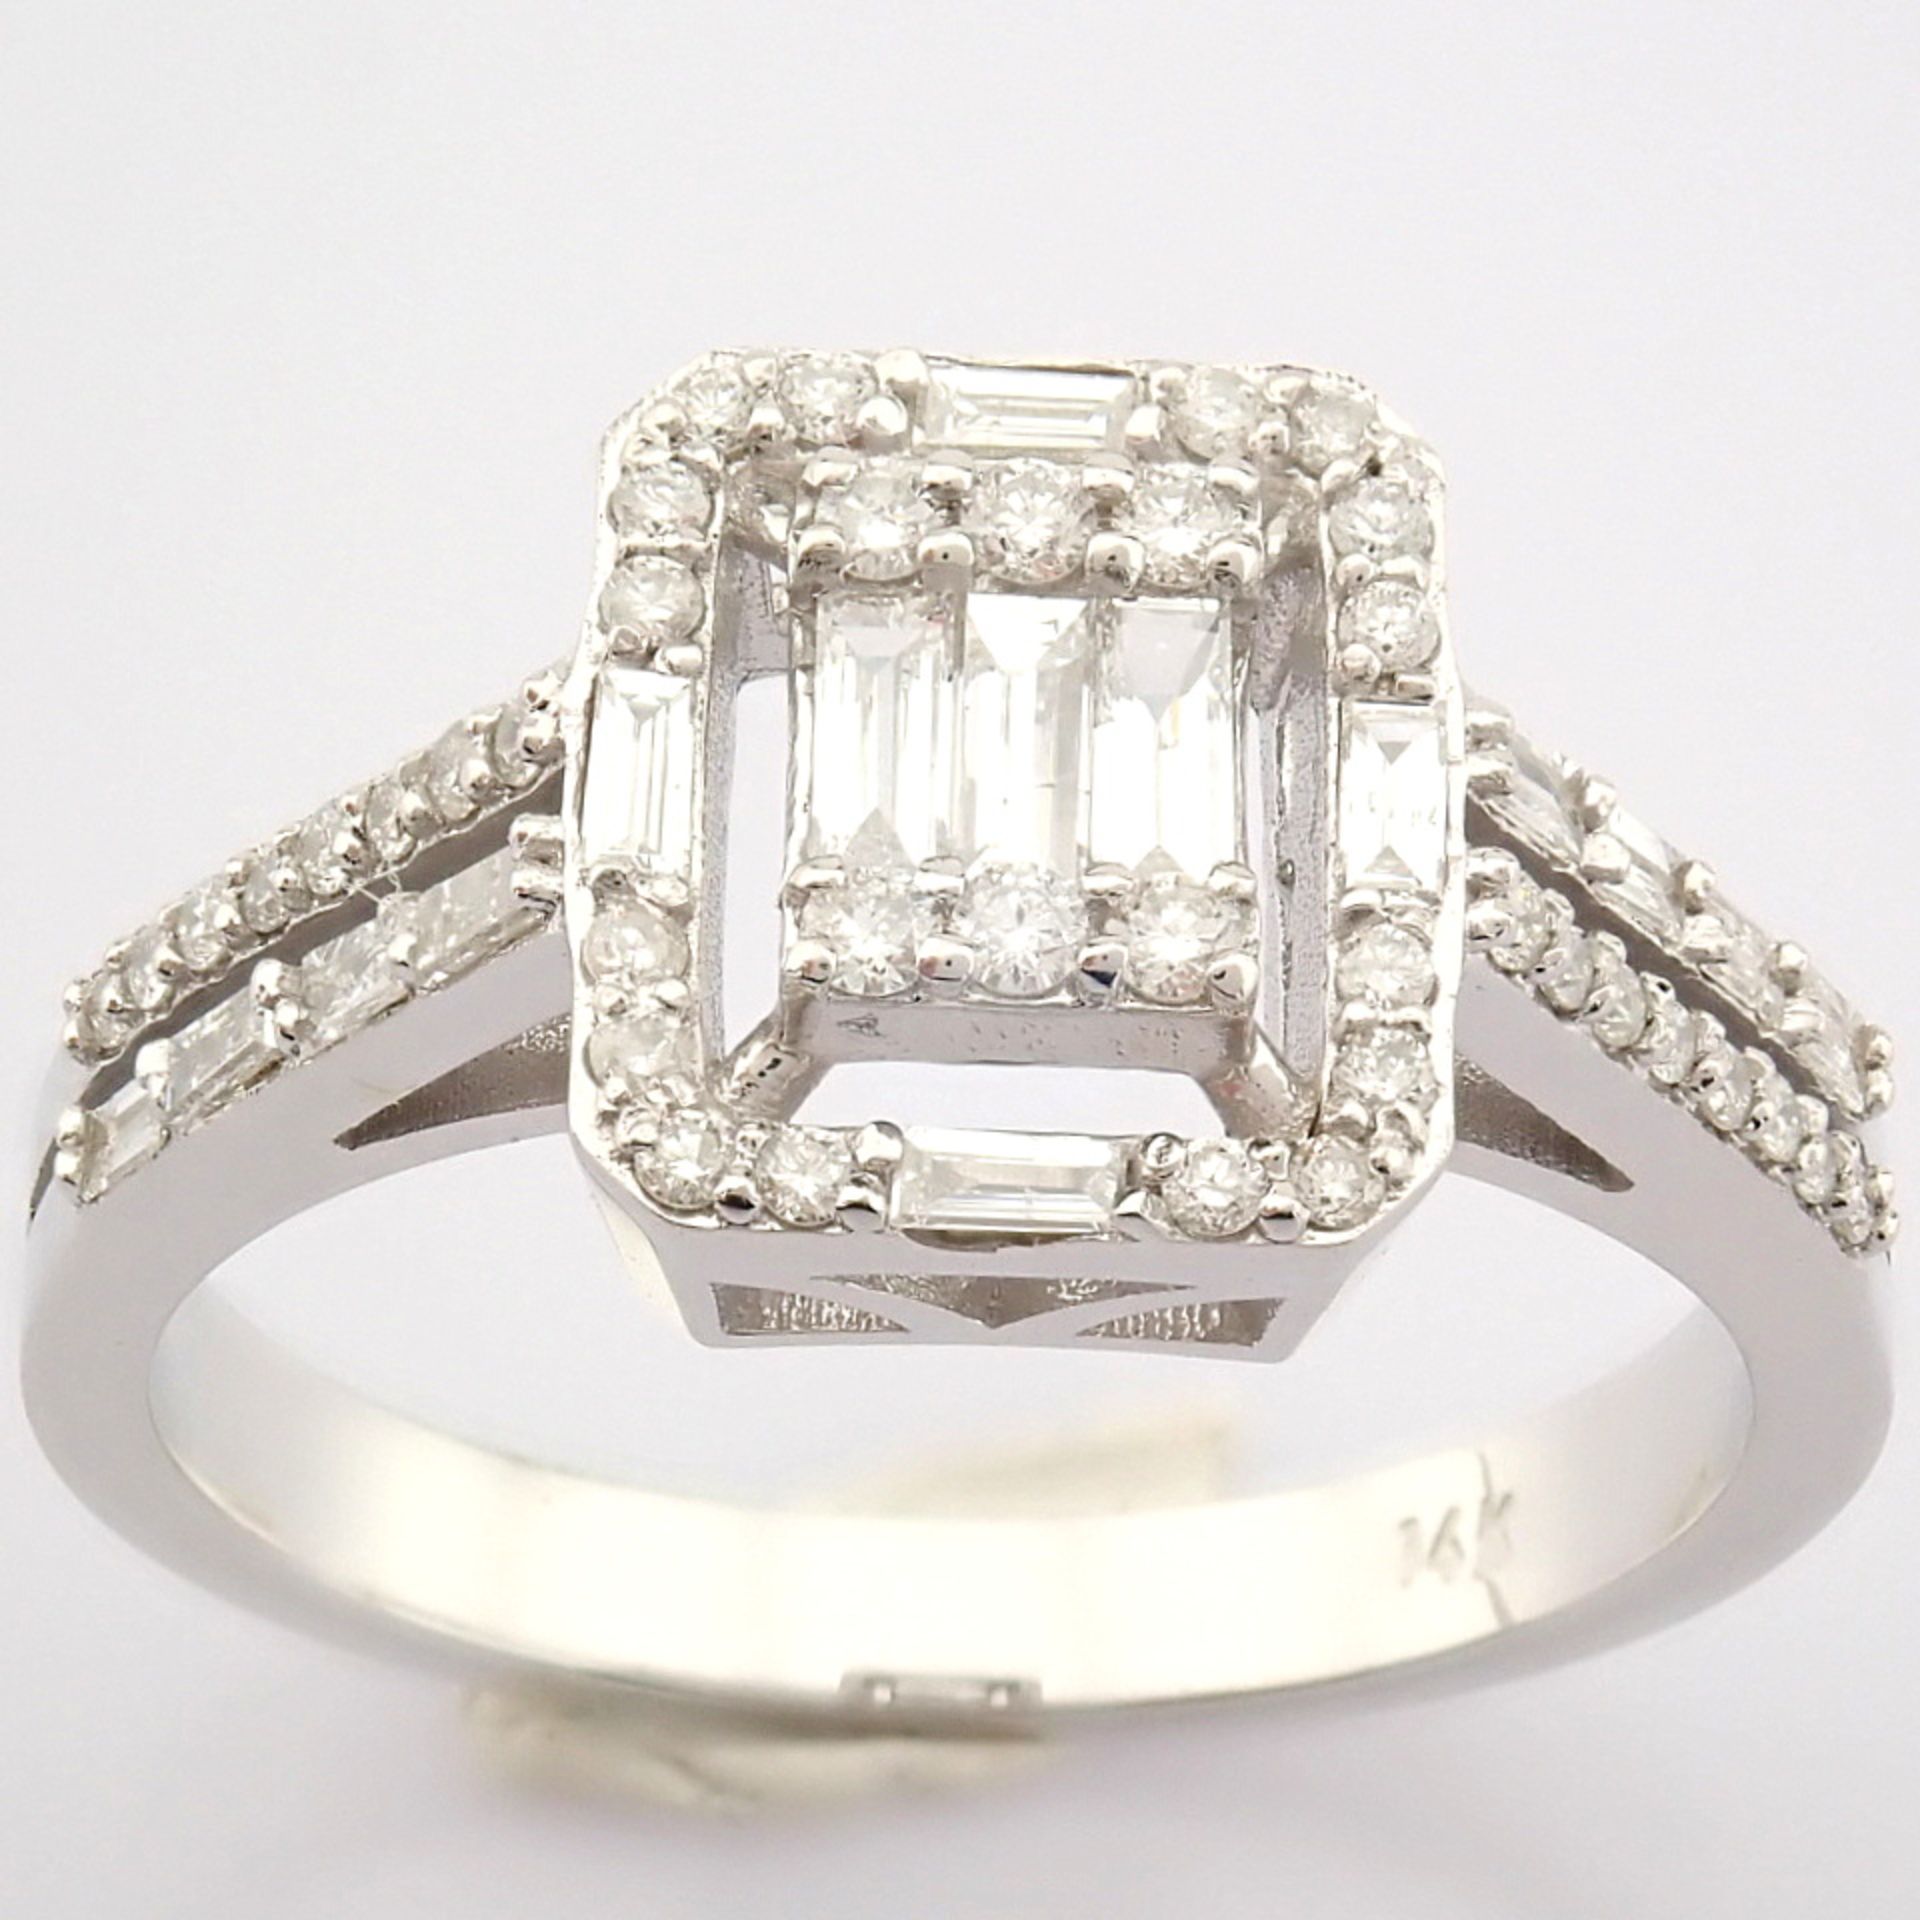 Certificated 14K White Gold Diamond Ring (Total 0.43 ct Stone) - Image 9 of 13